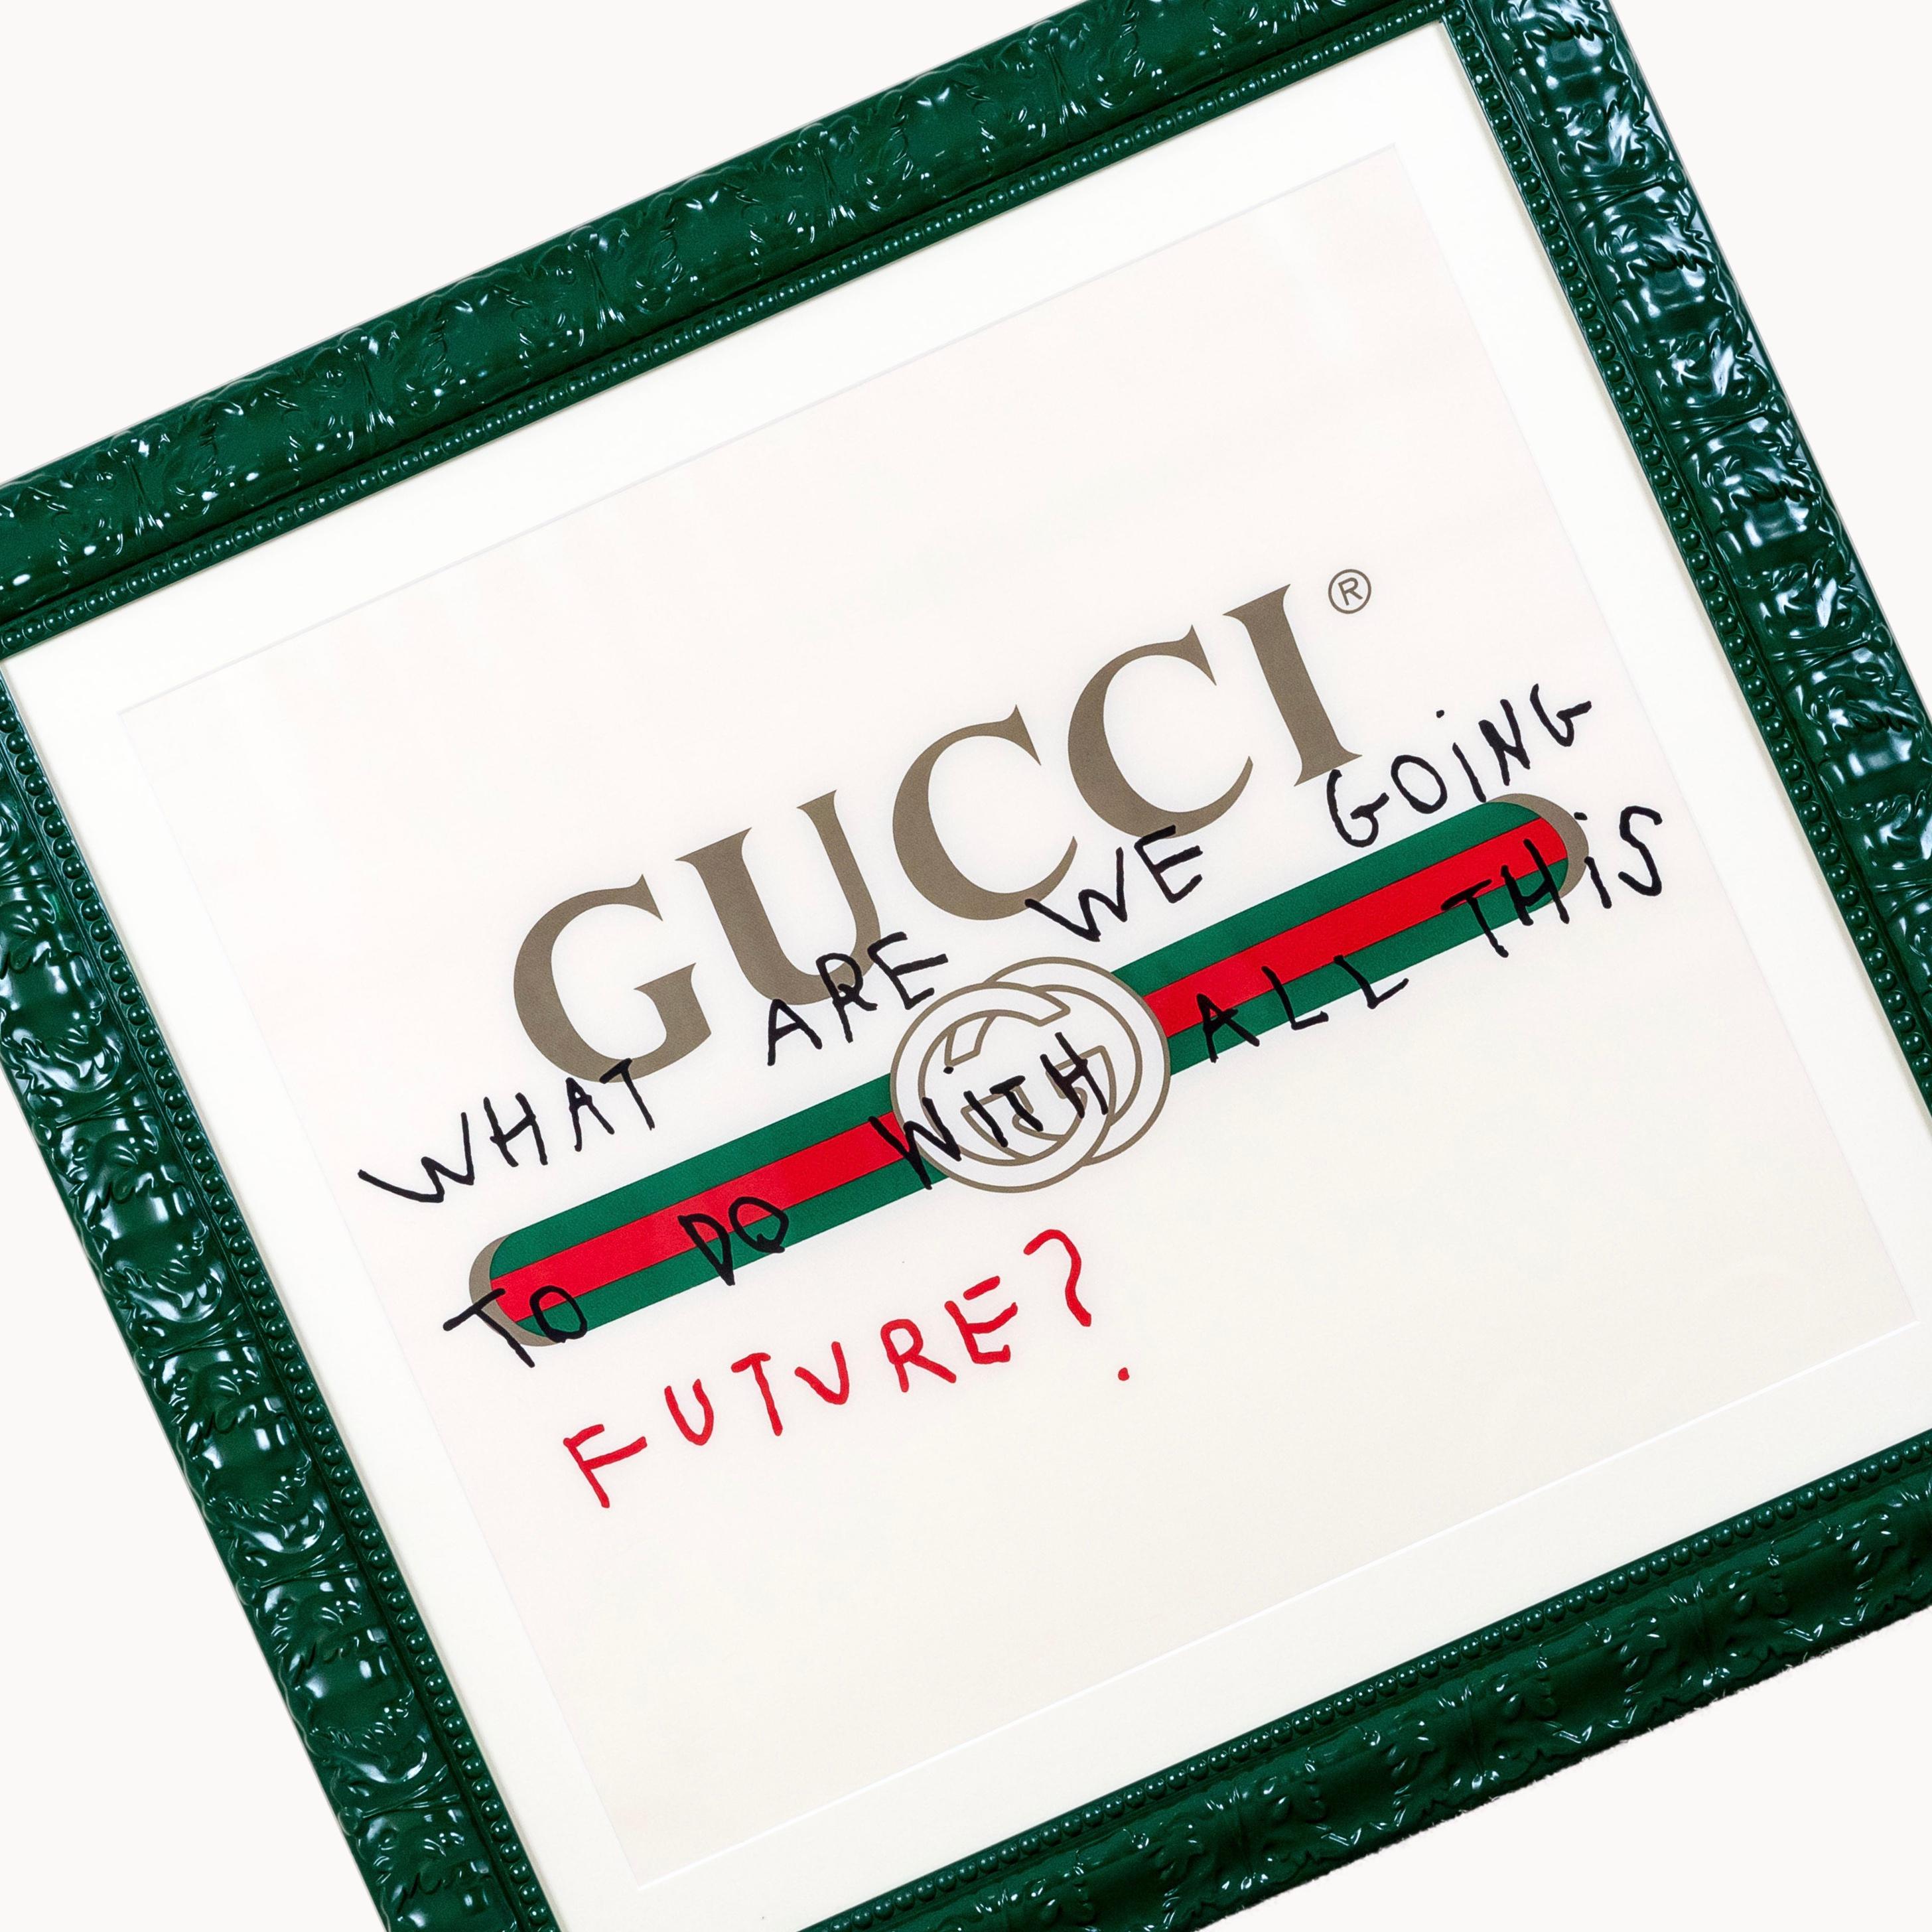 GUCCI - WHAT ARE WE GOING TO DO WITH ALL THIS FUTURE - 2017 - EL CAPITAN For Sale 1